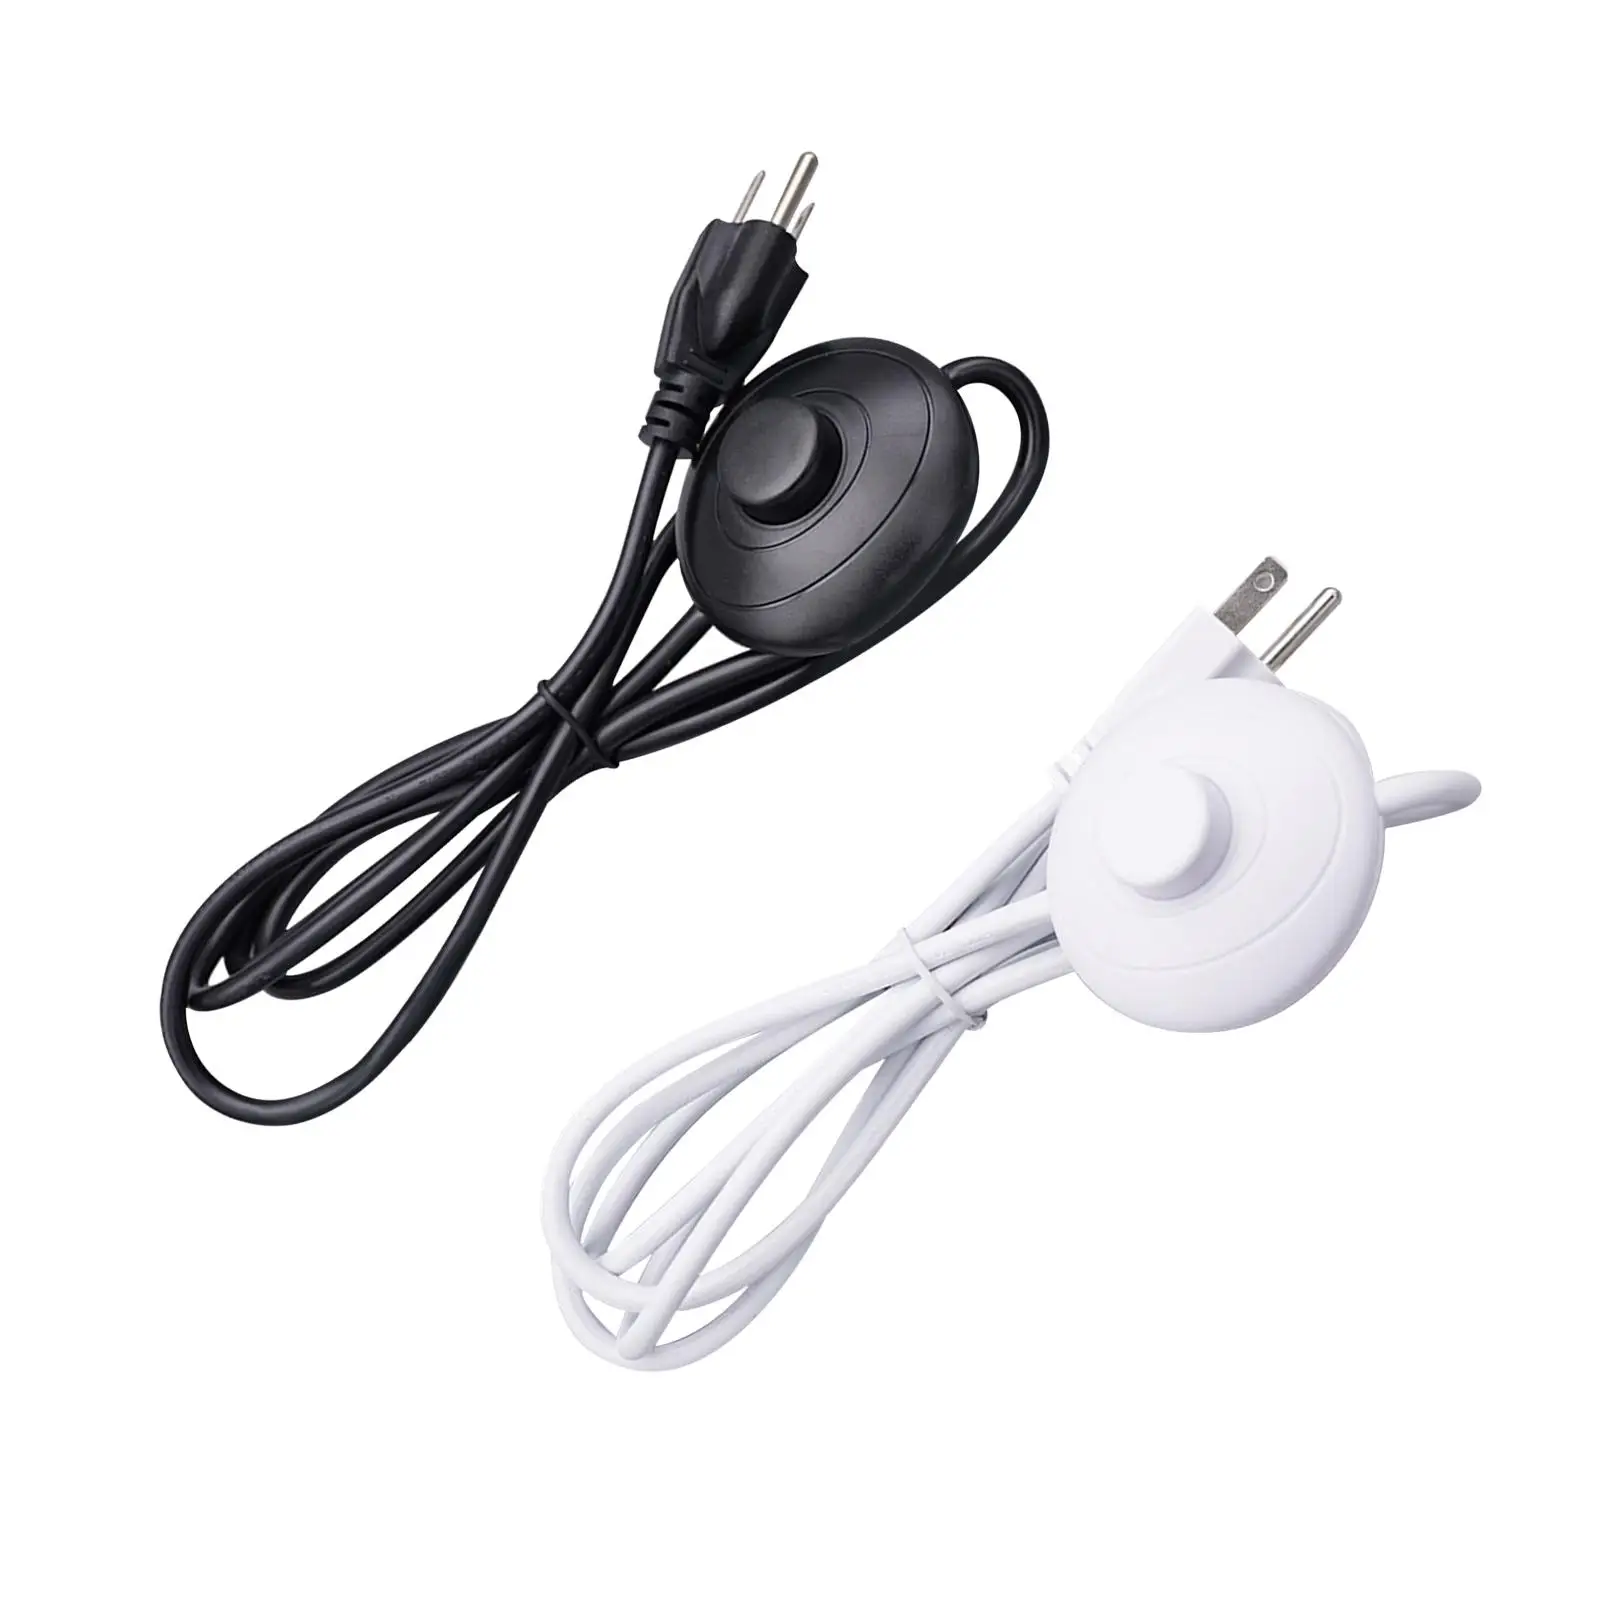 Lamp Power Cord Button Switch with Foot Switch Wire for Indoor Lighting LED Light